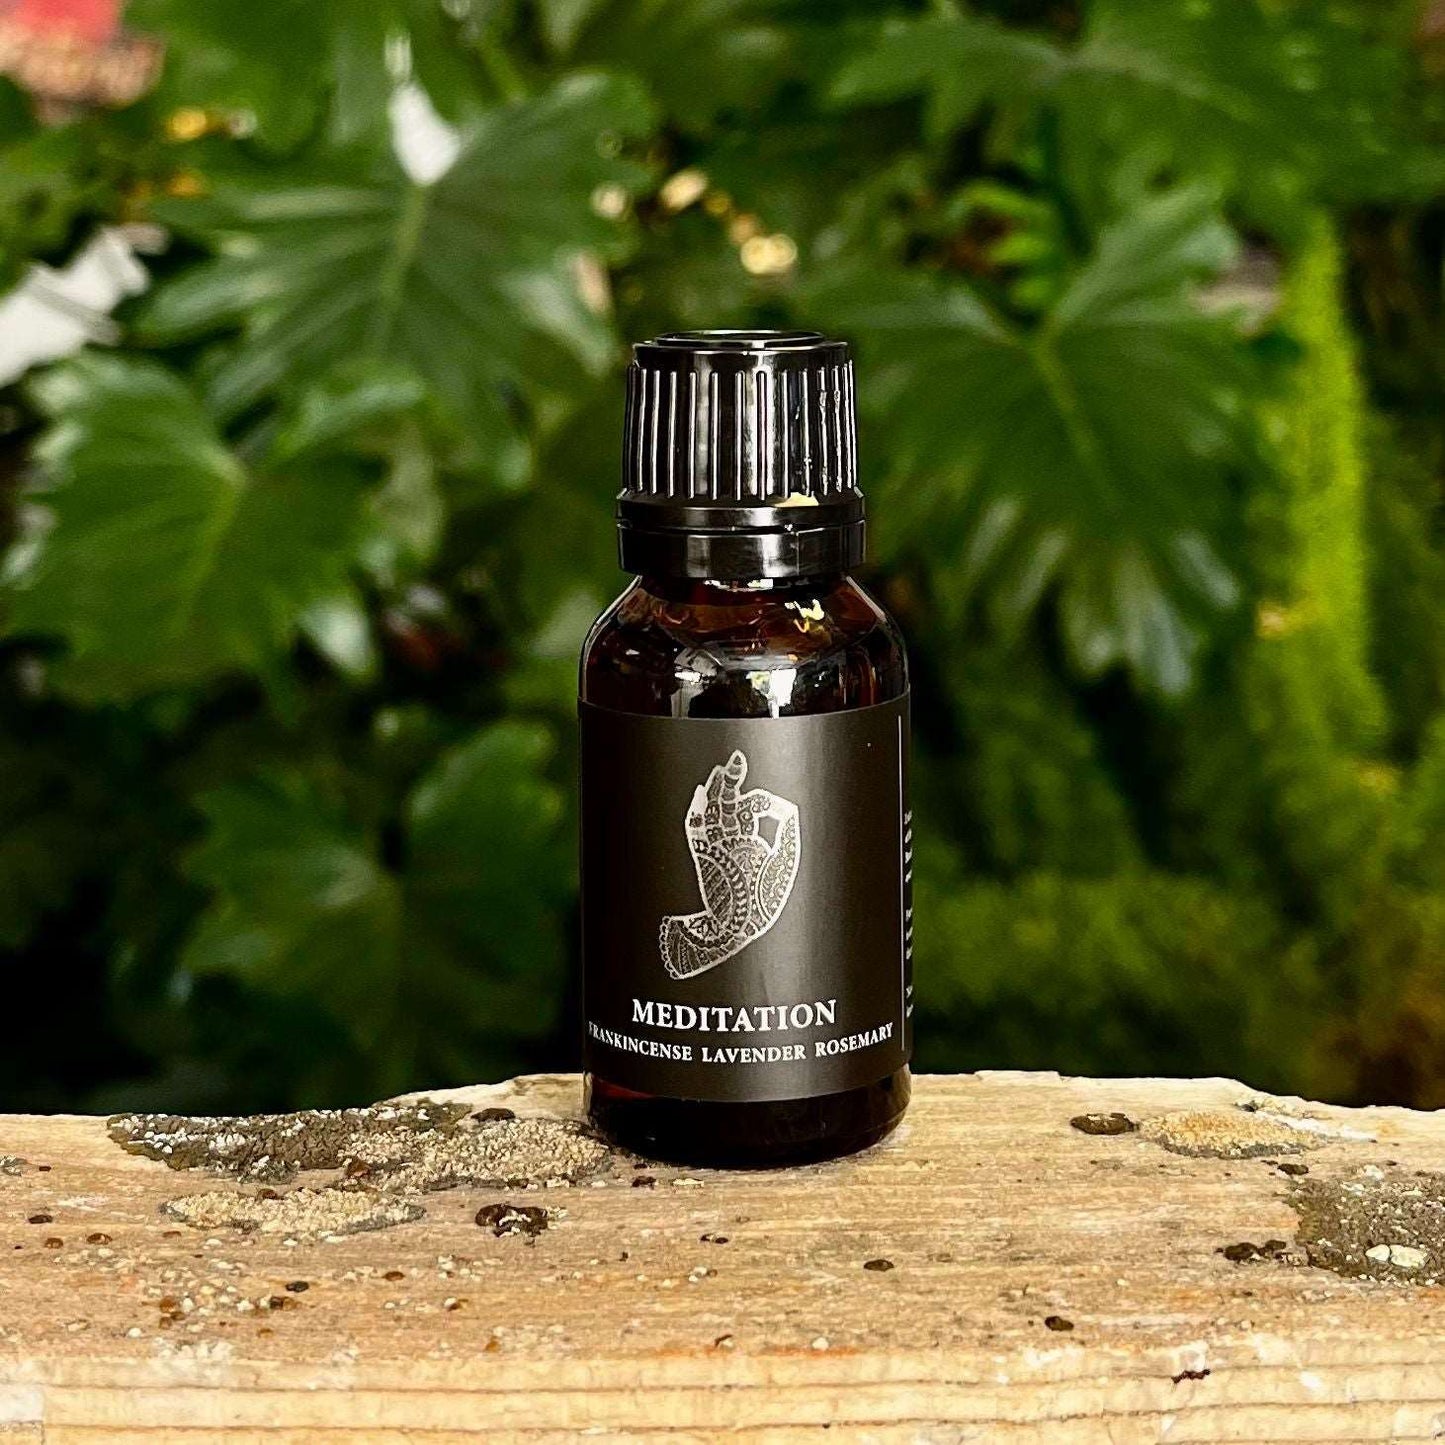 0.5 oz Meditation Essential Oil Blend with a Proprietary Blend of Organic Essential Oils, Organic Fractionated Coconut Oil, and a Crystal Charged Under the Full Moon for Serenity and Mindful Relaxation